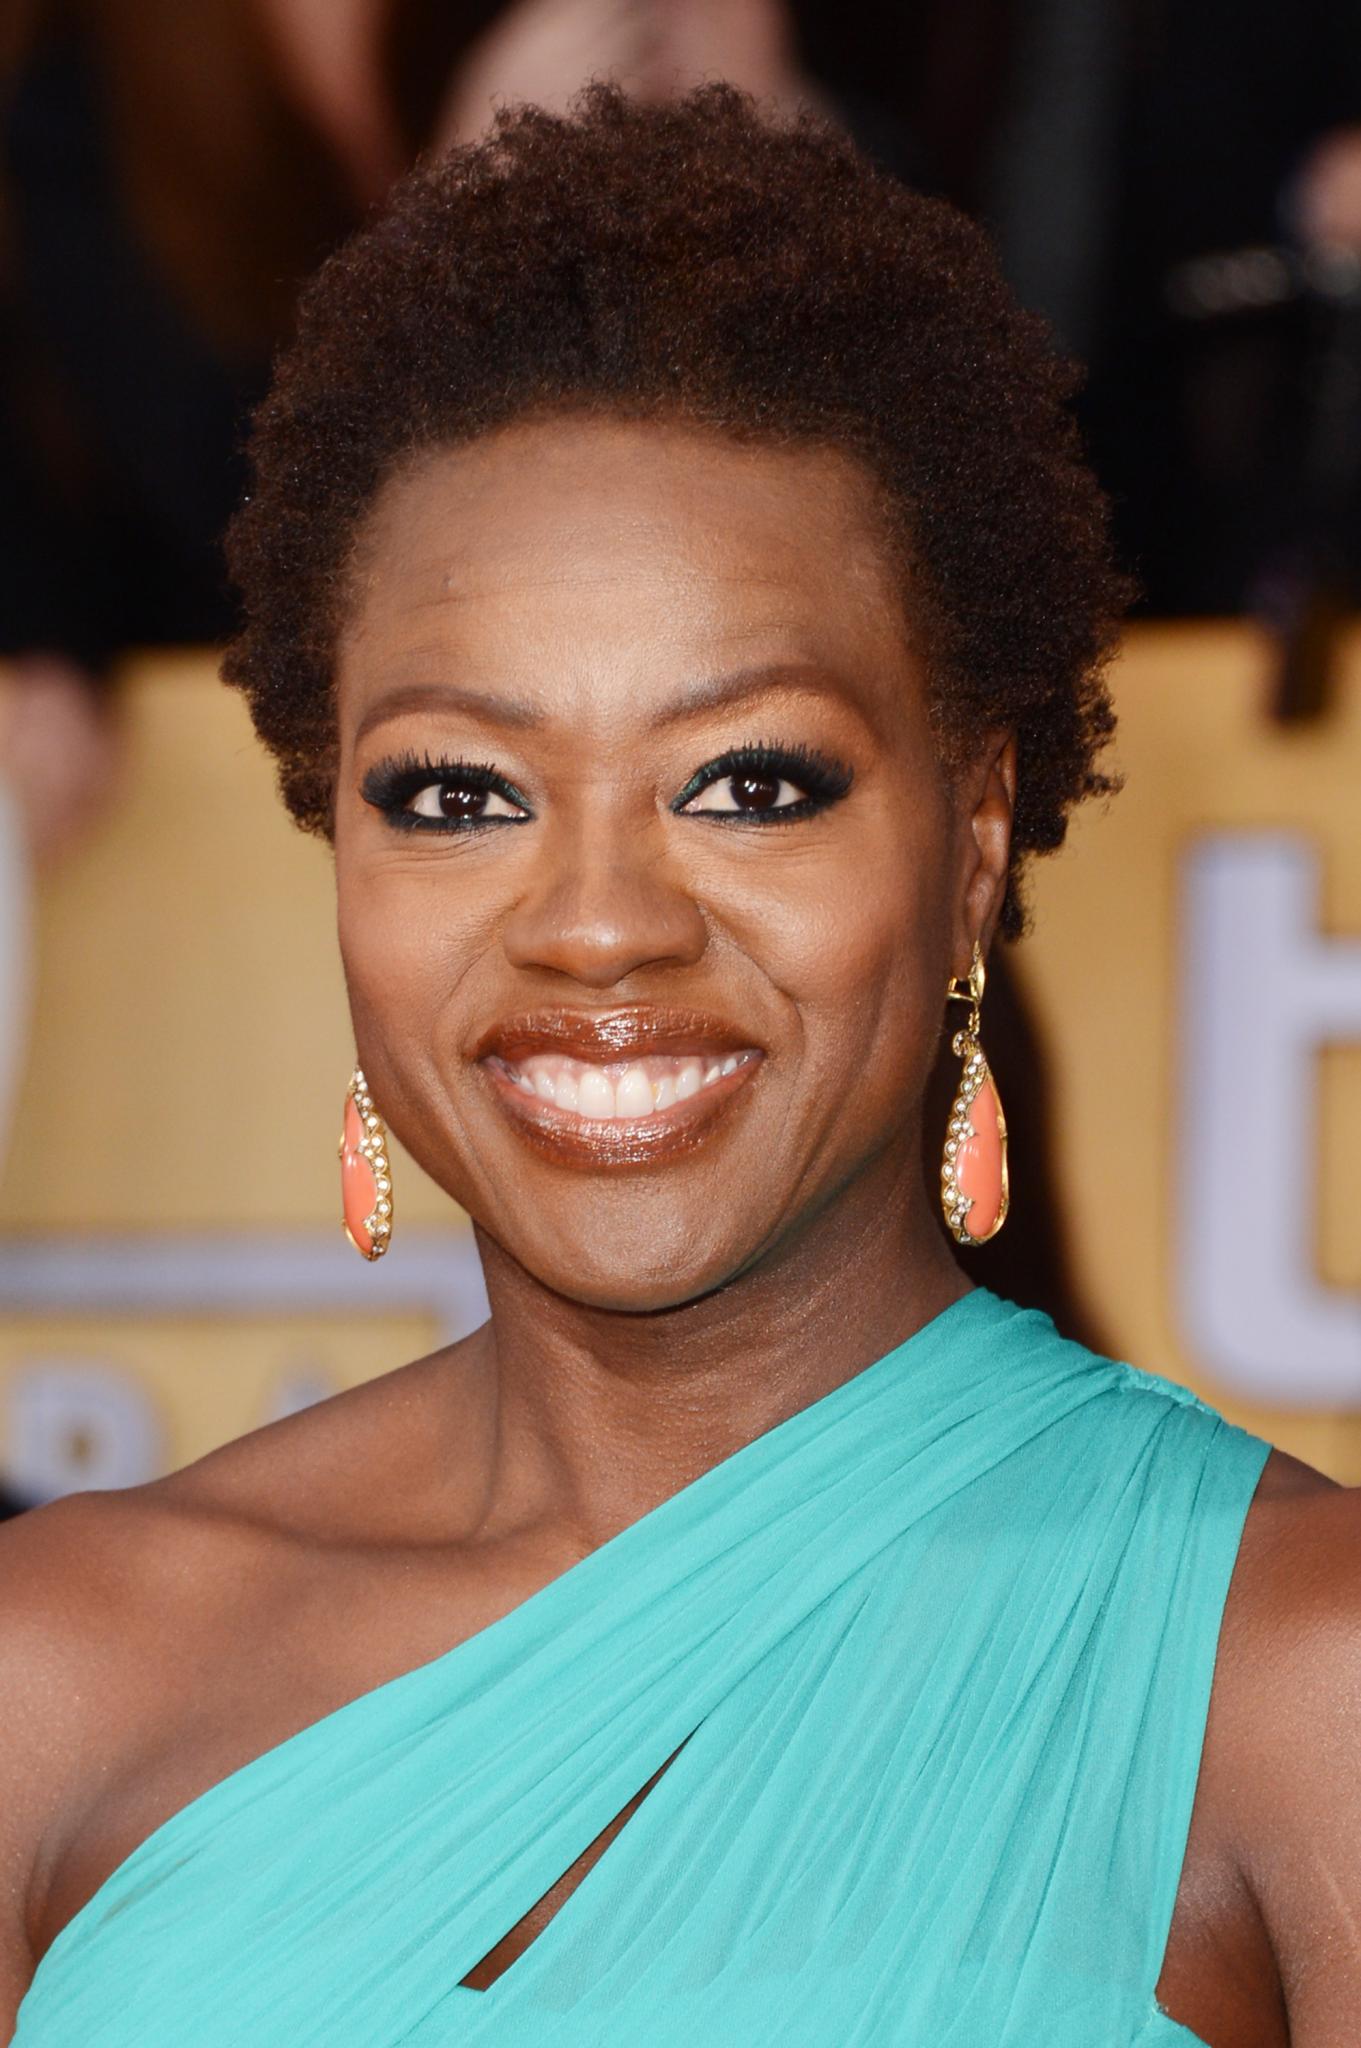 Viola Davis to Star in Shonda Rhimes' 'How to Get Away With Murder'
